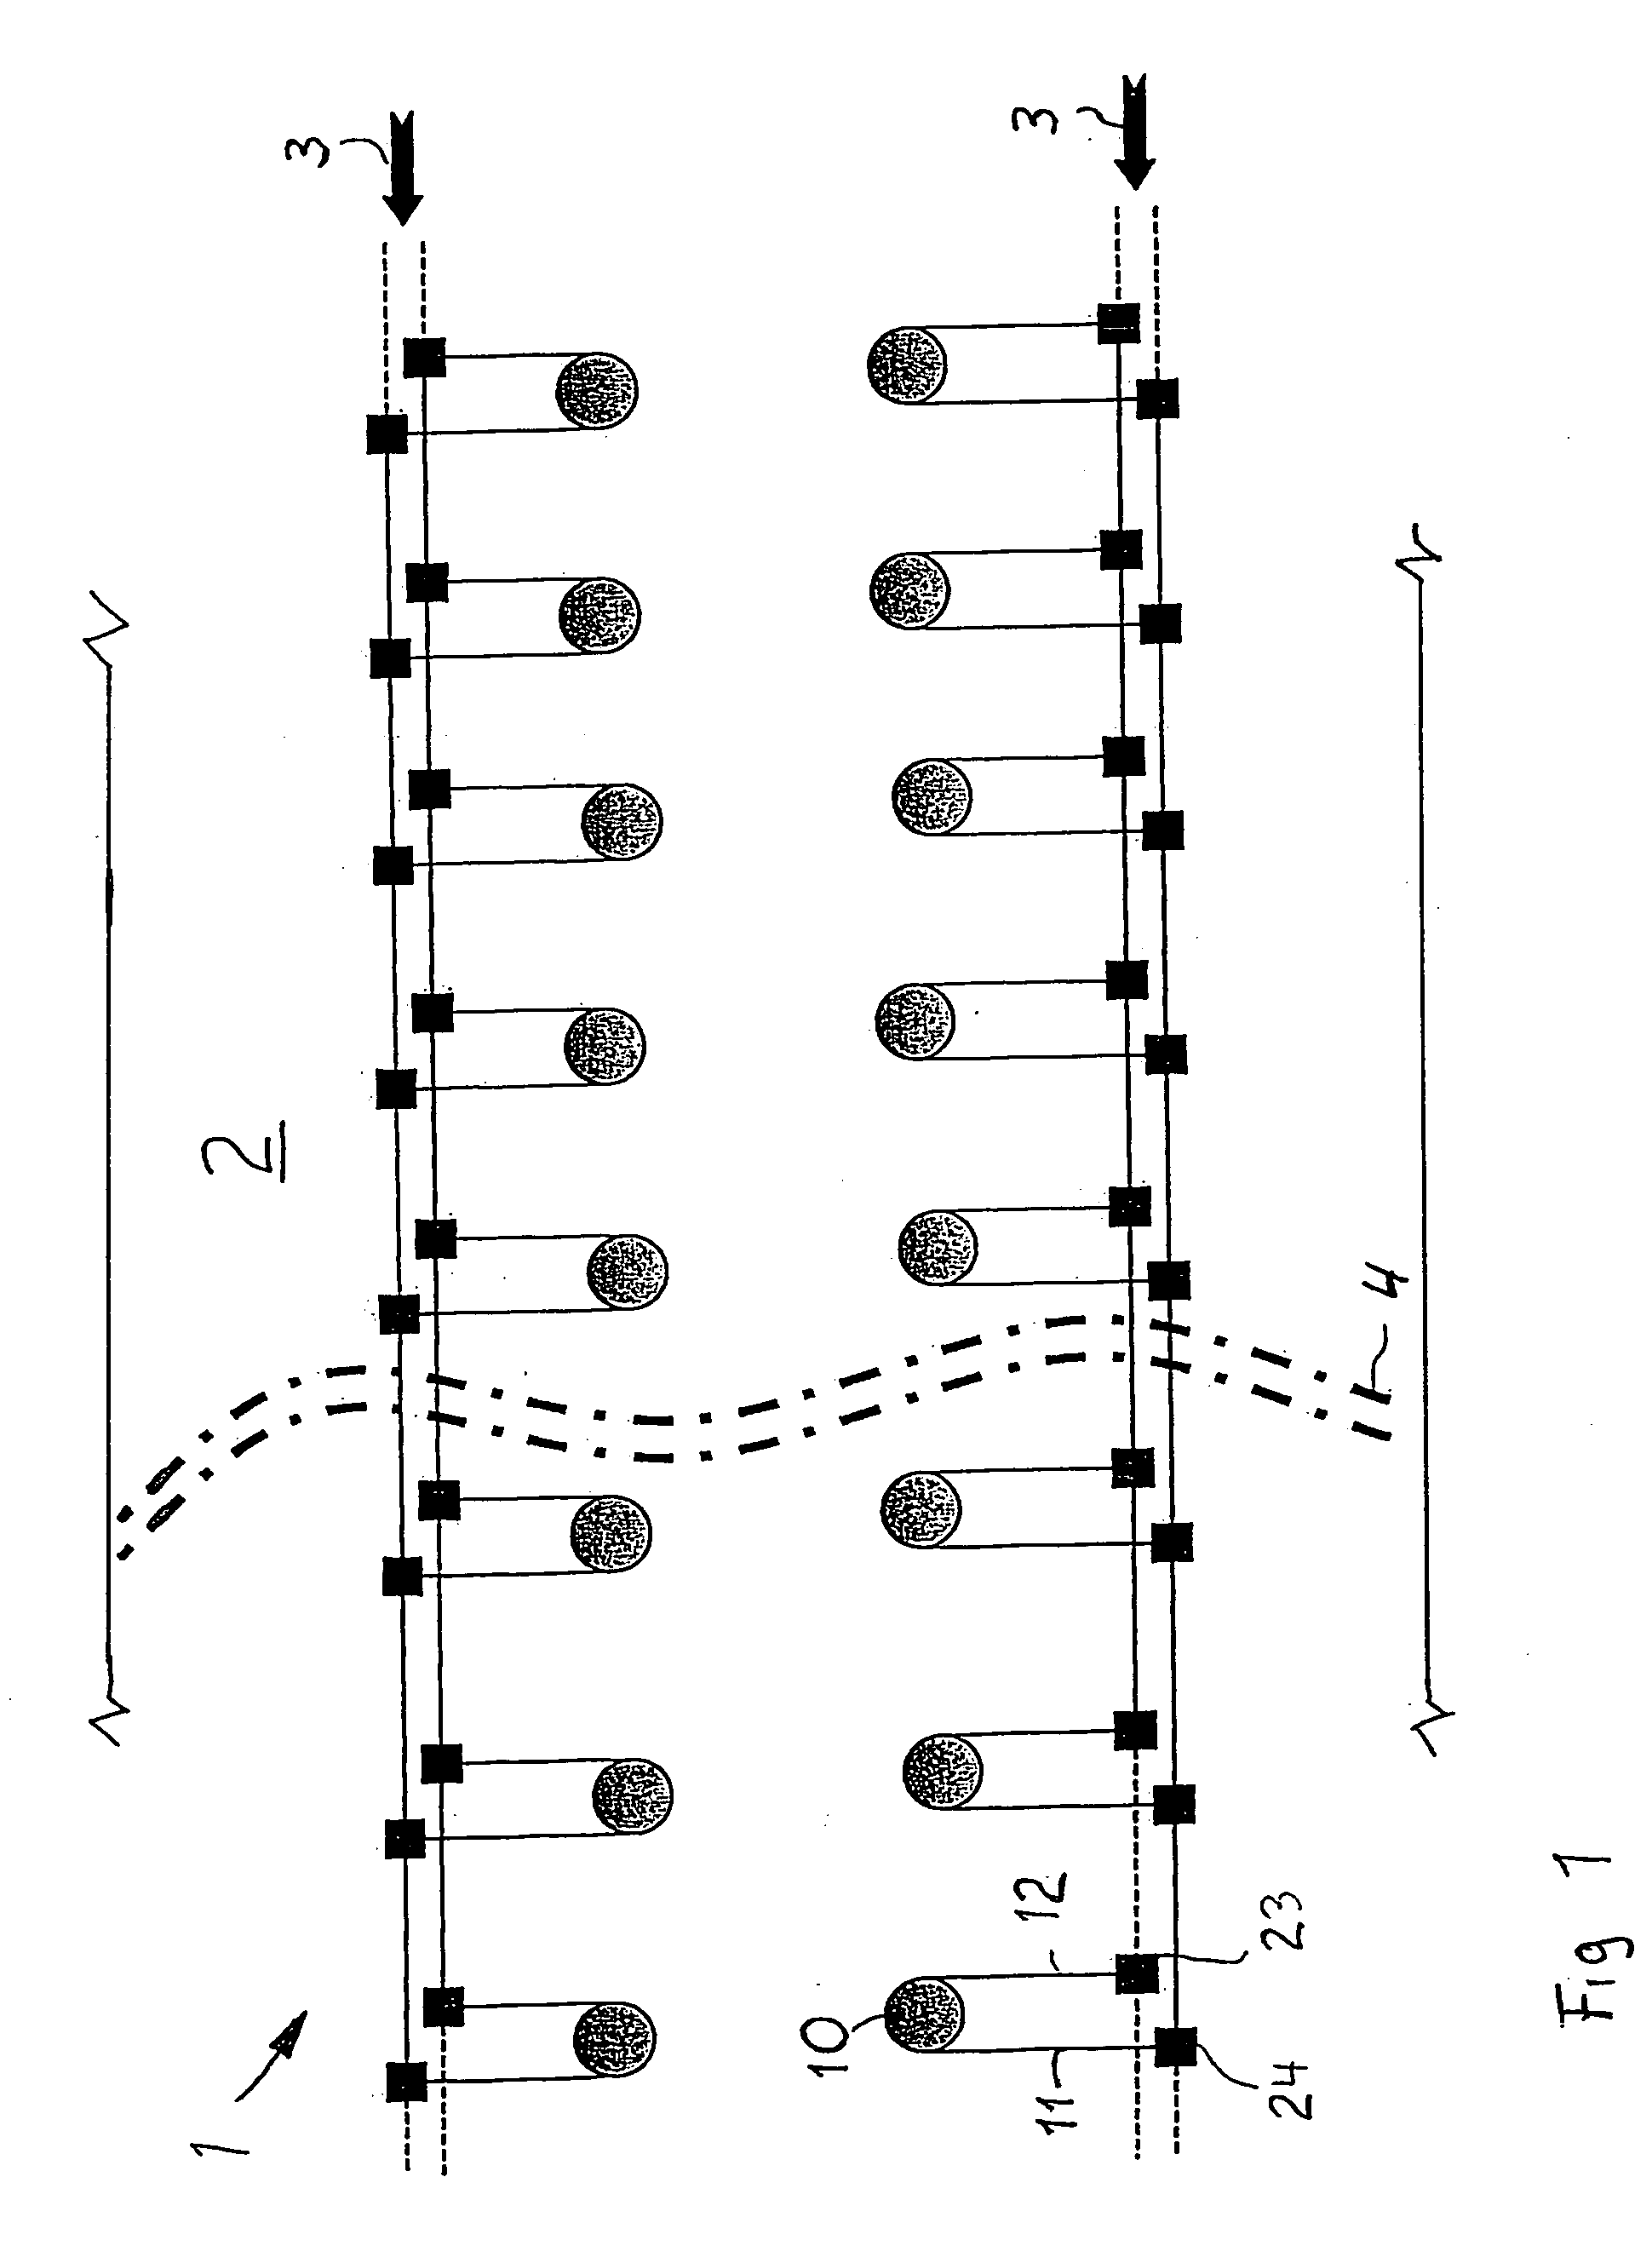 Emergency lighting arrangement with decentralized emergency power supply for an aircraft